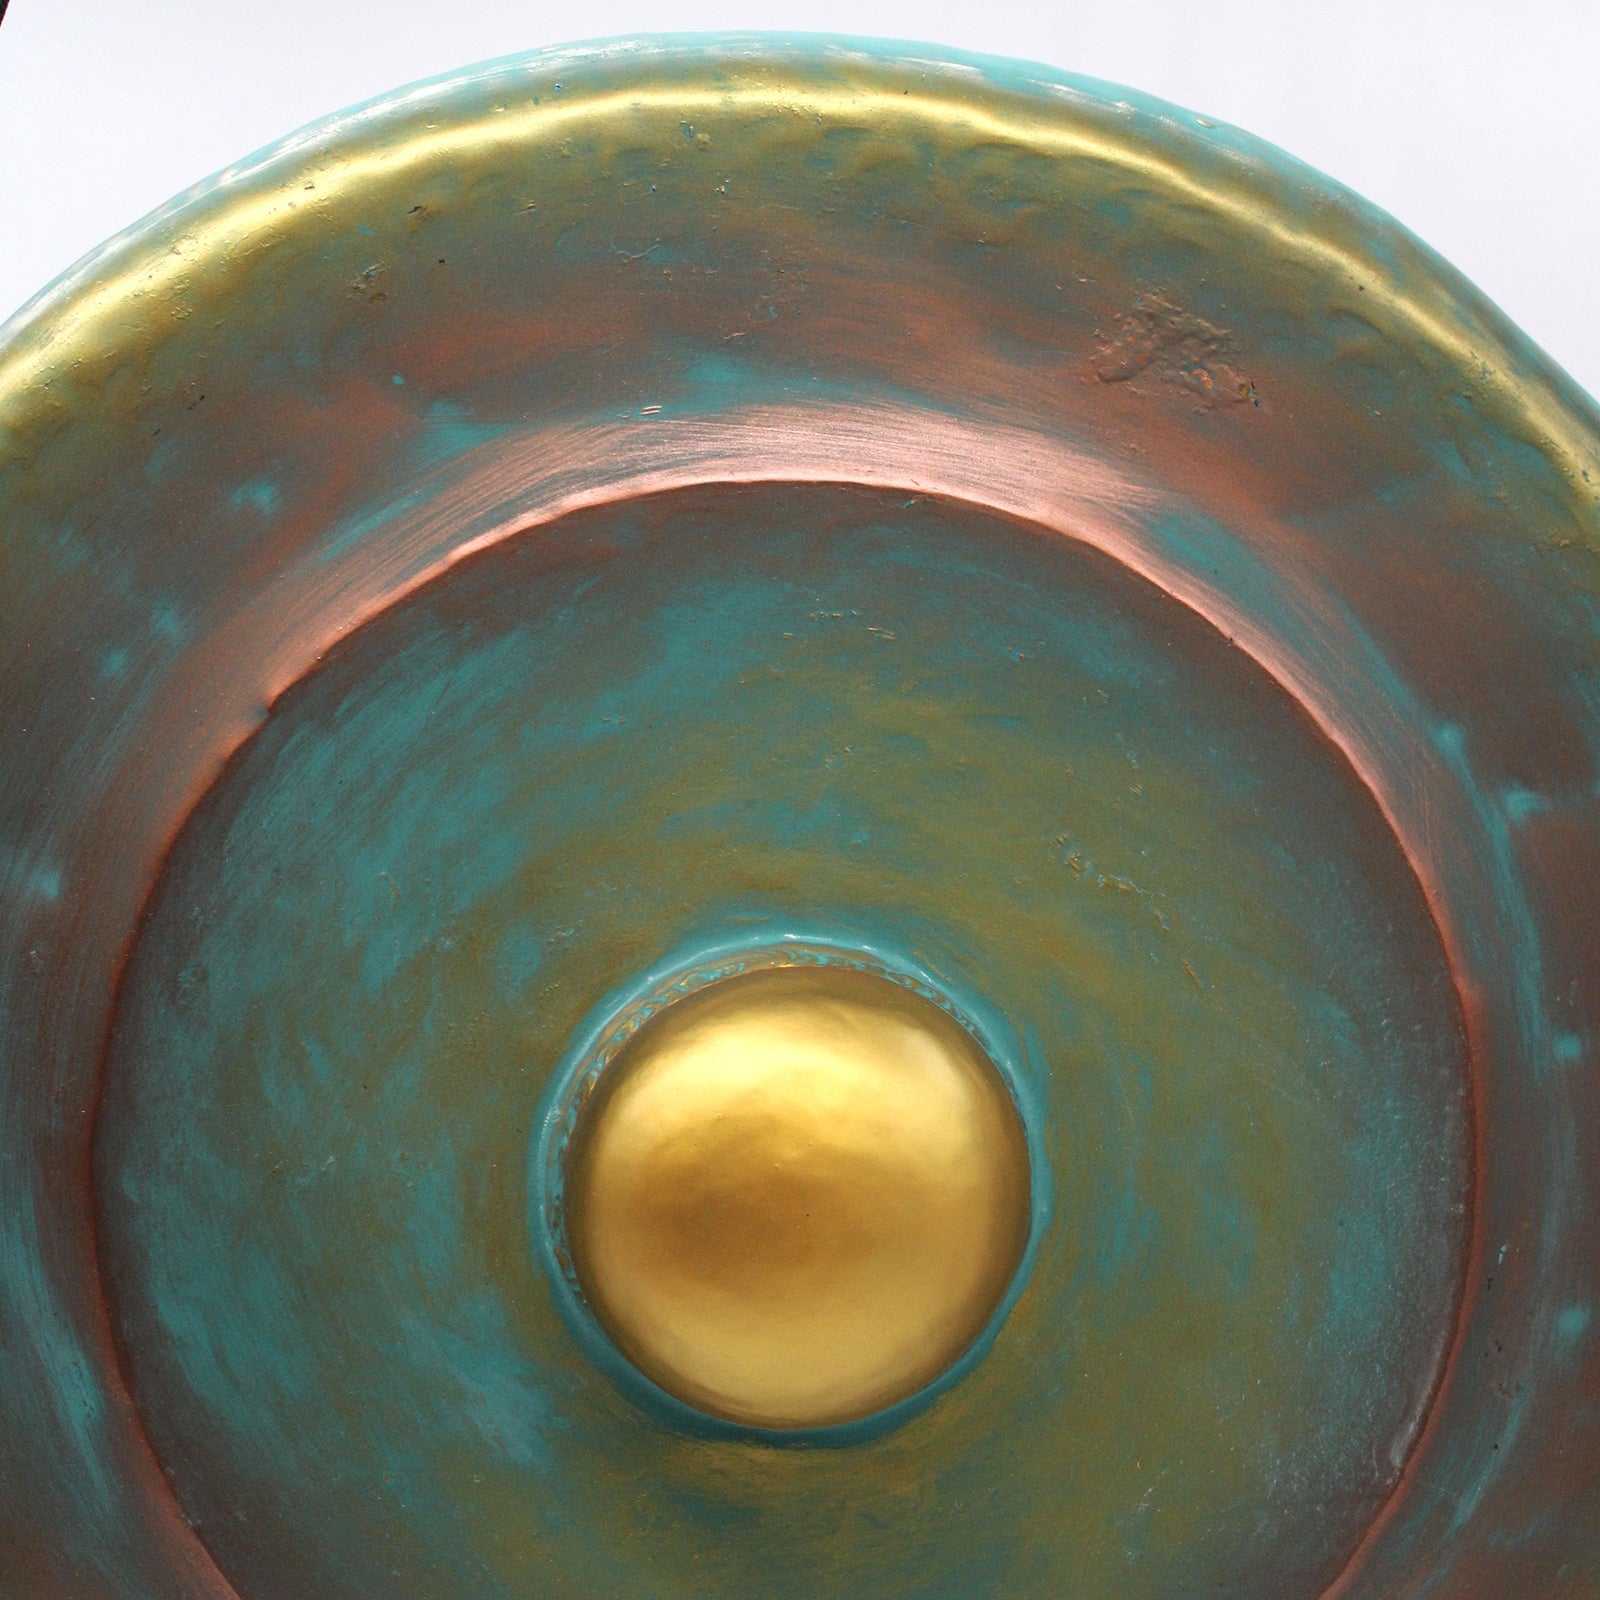 Healing Gong in Stand - 50cm - Greenwash - Positive Faith Hope Love